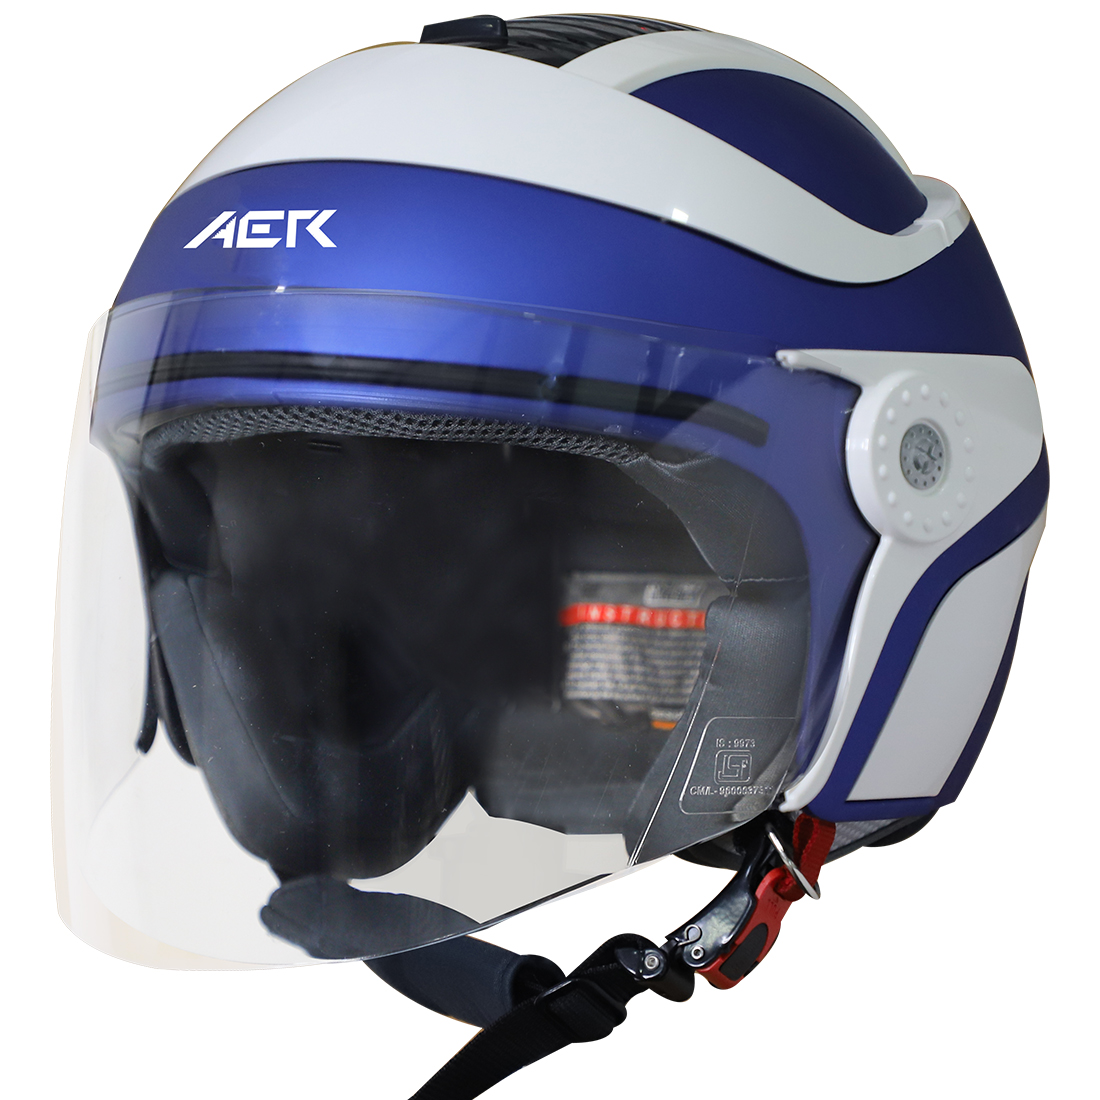 Steelbird SB-29 AER ISI Certified Helmet For Men And Women (Matt Y.Blue Off White With Clear Visor)